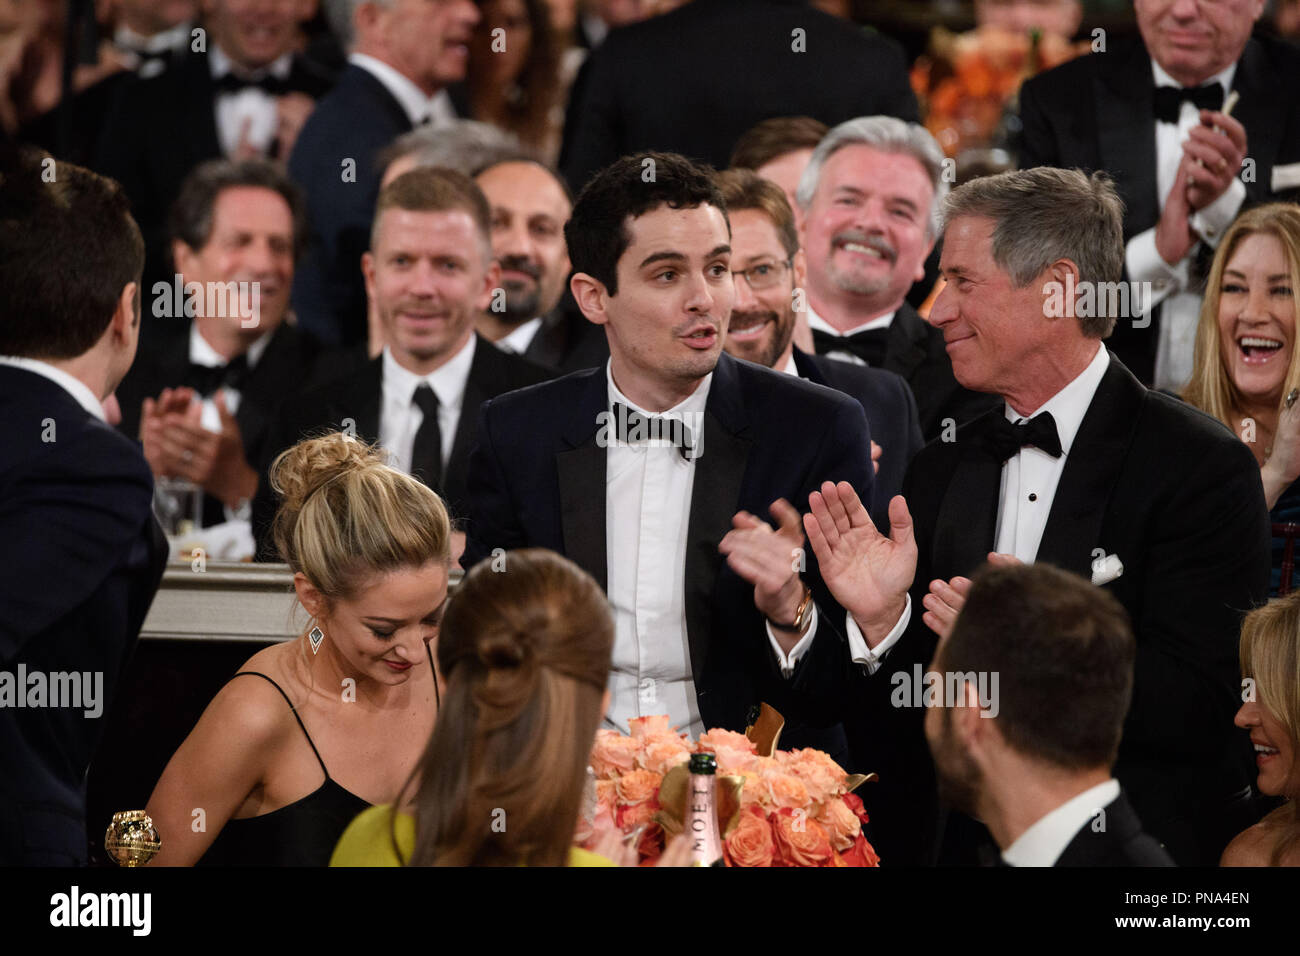 The Golden Globe is awarded to Damien Chazelle for BEST DIRECTOR – MOTION PICTURE for 'La La Land' at the 74th Annual Golden Globe Awards at the Beverly Hilton in Beverly Hills, CA on Sunday, January 8, 2017.  File Reference # 33198 930JRC  For Editorial Use Only -  All Rights Reserved Stock Photo